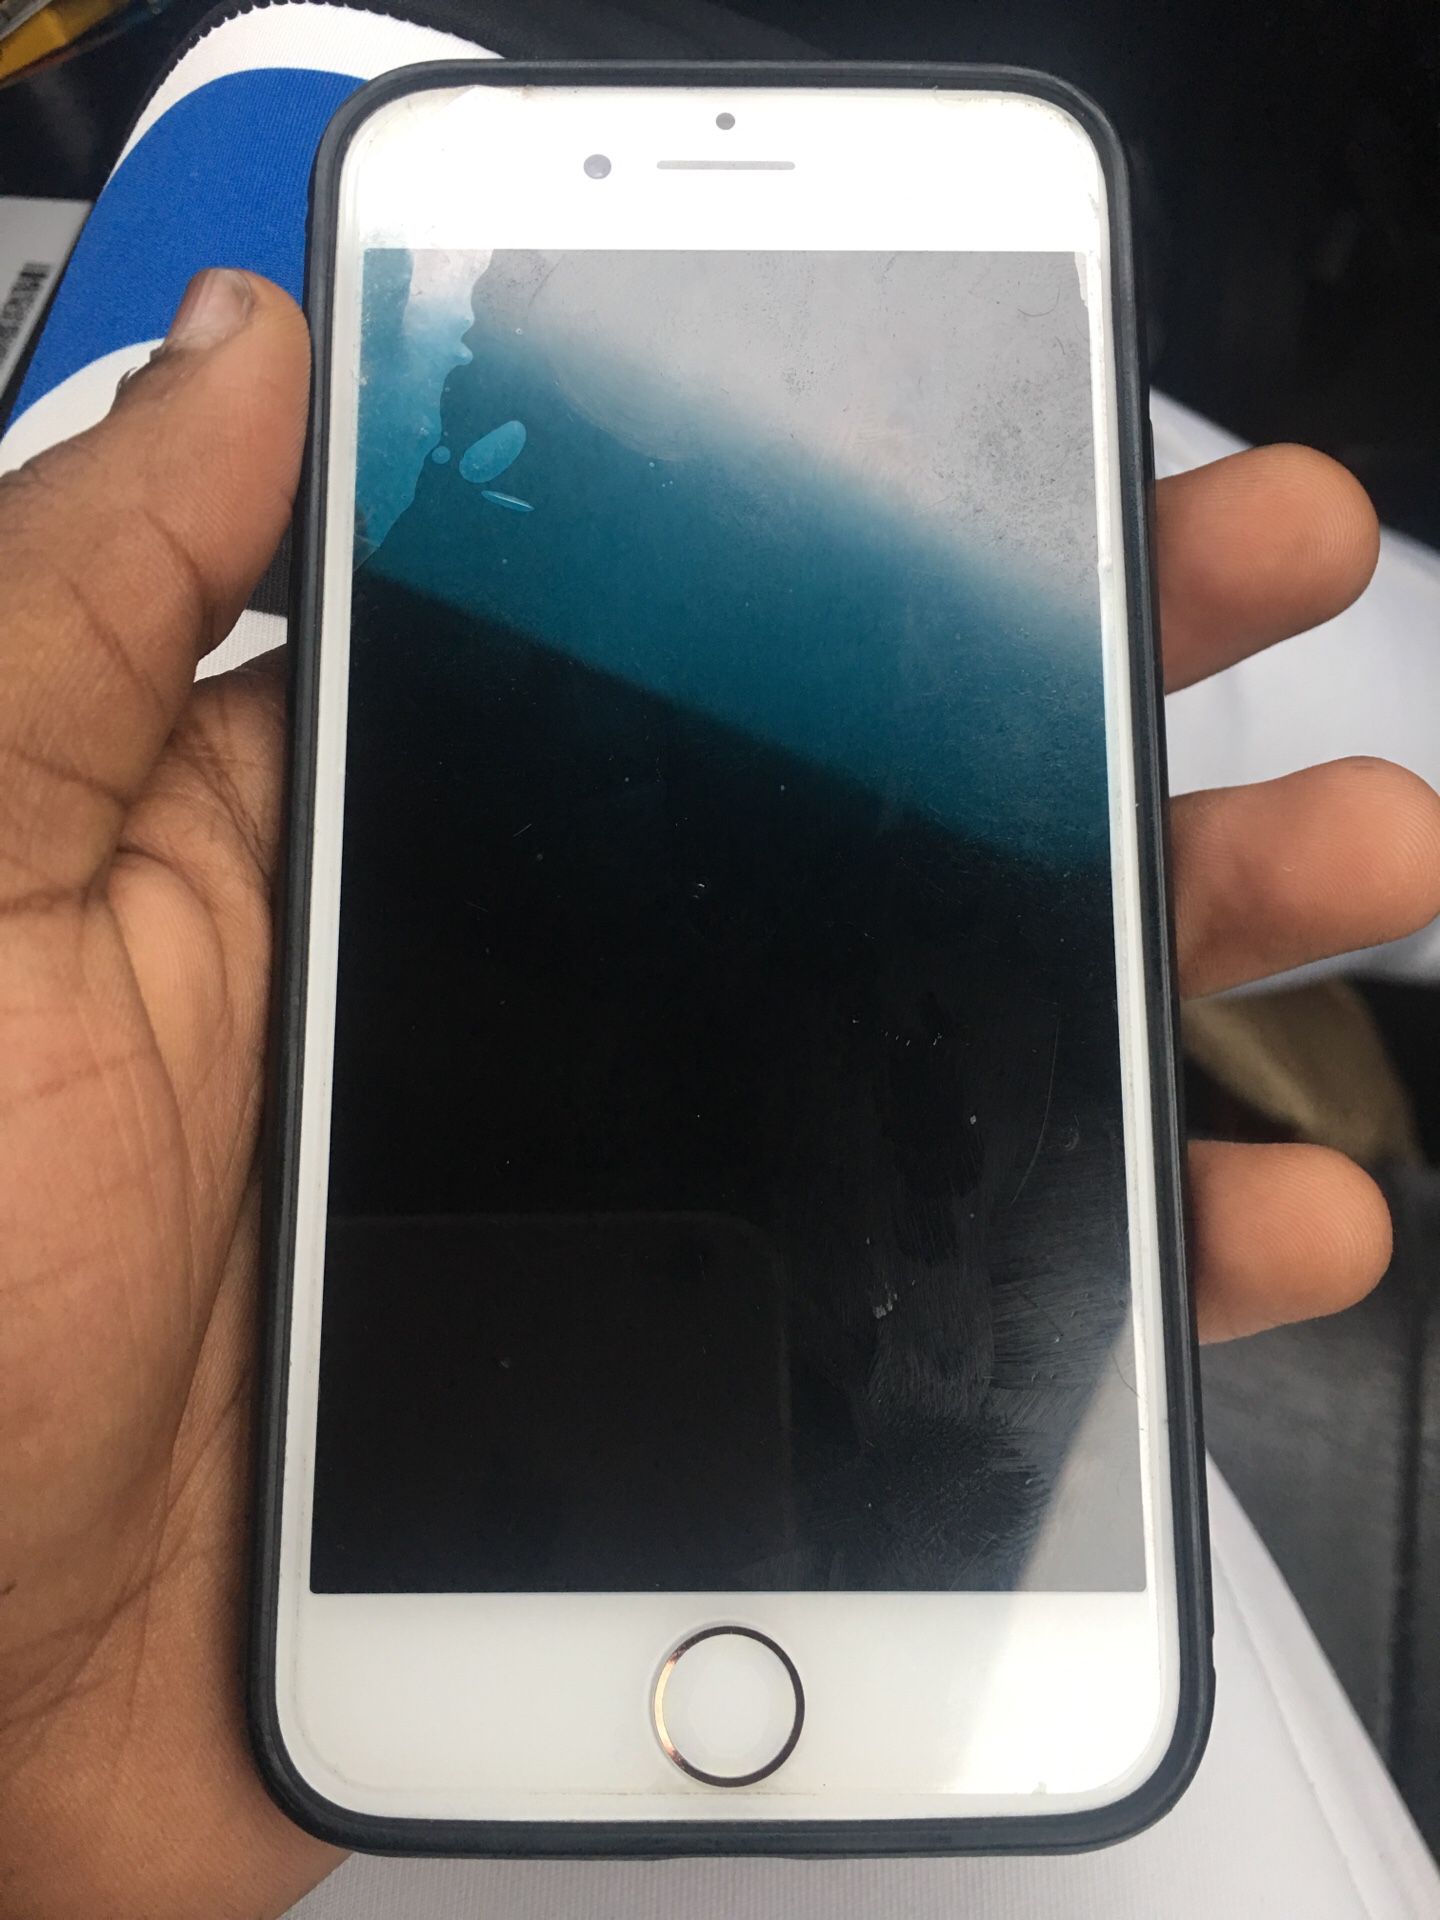 iPhone 7 for sell $250